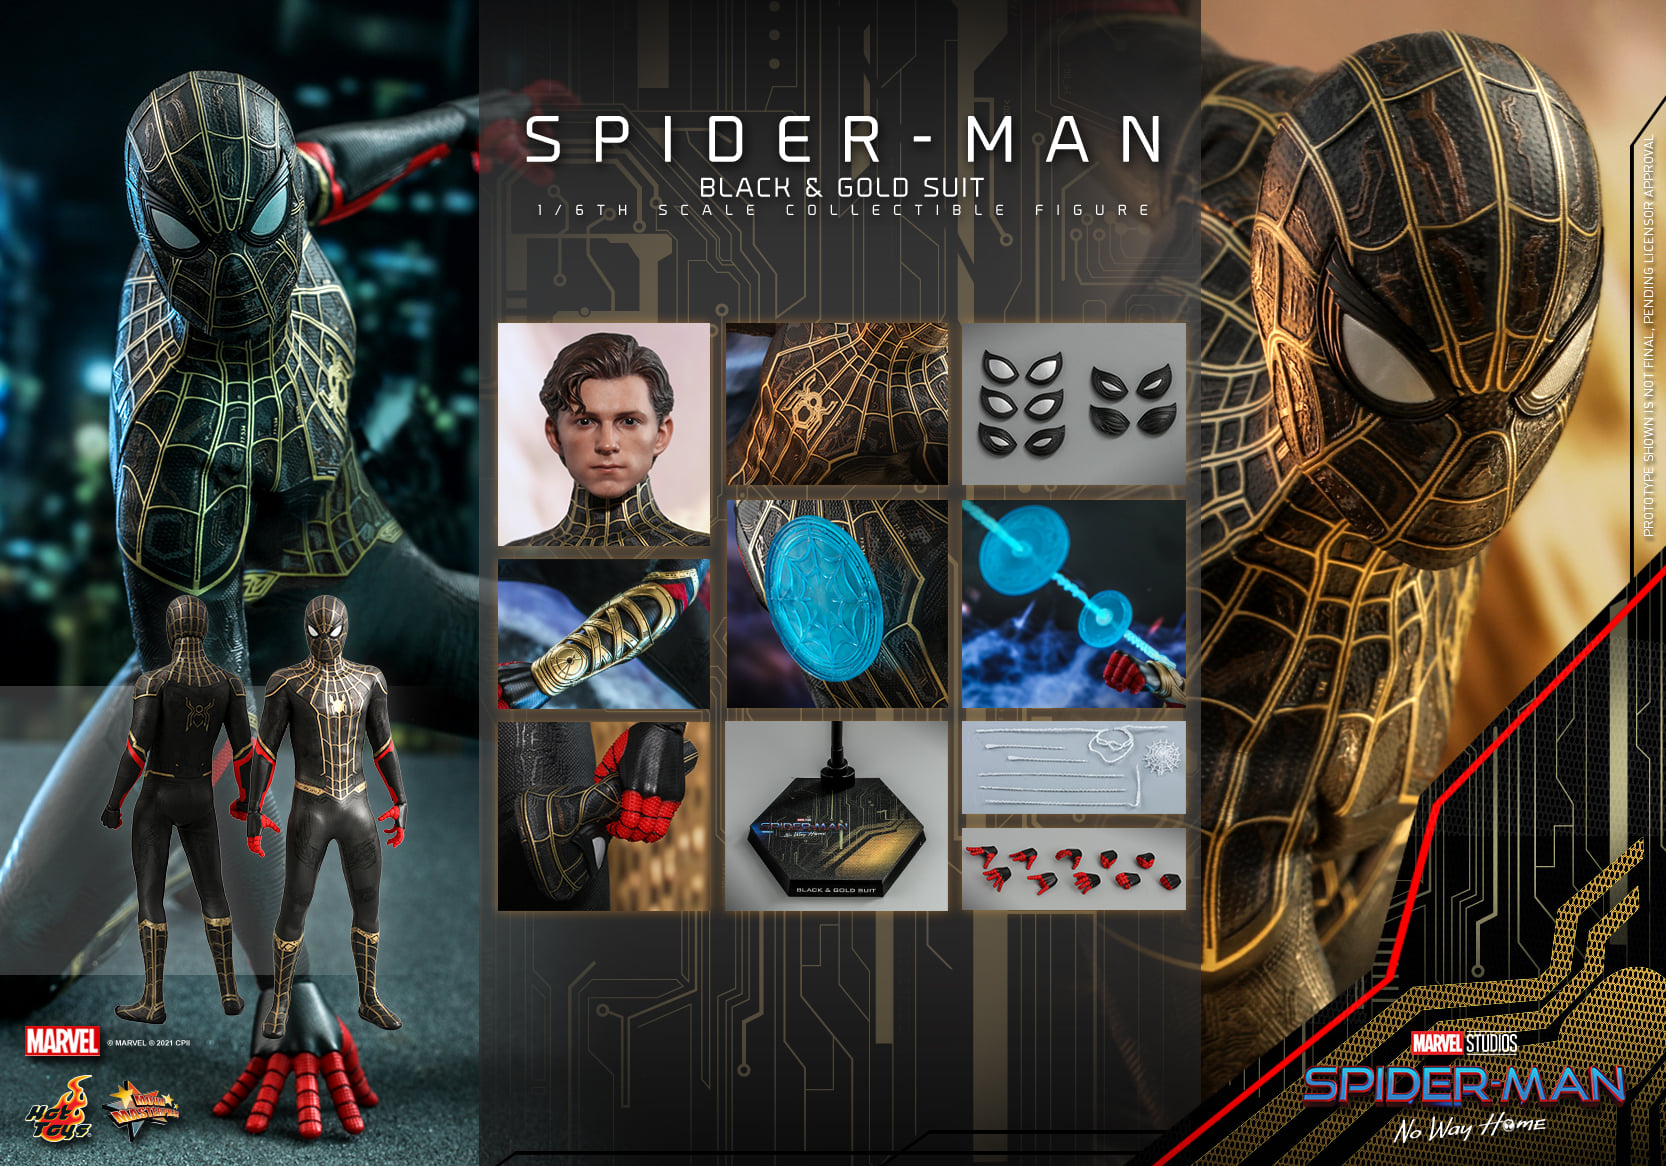 'SpiderMan No Way Home' Black and Gold Suit Revealed